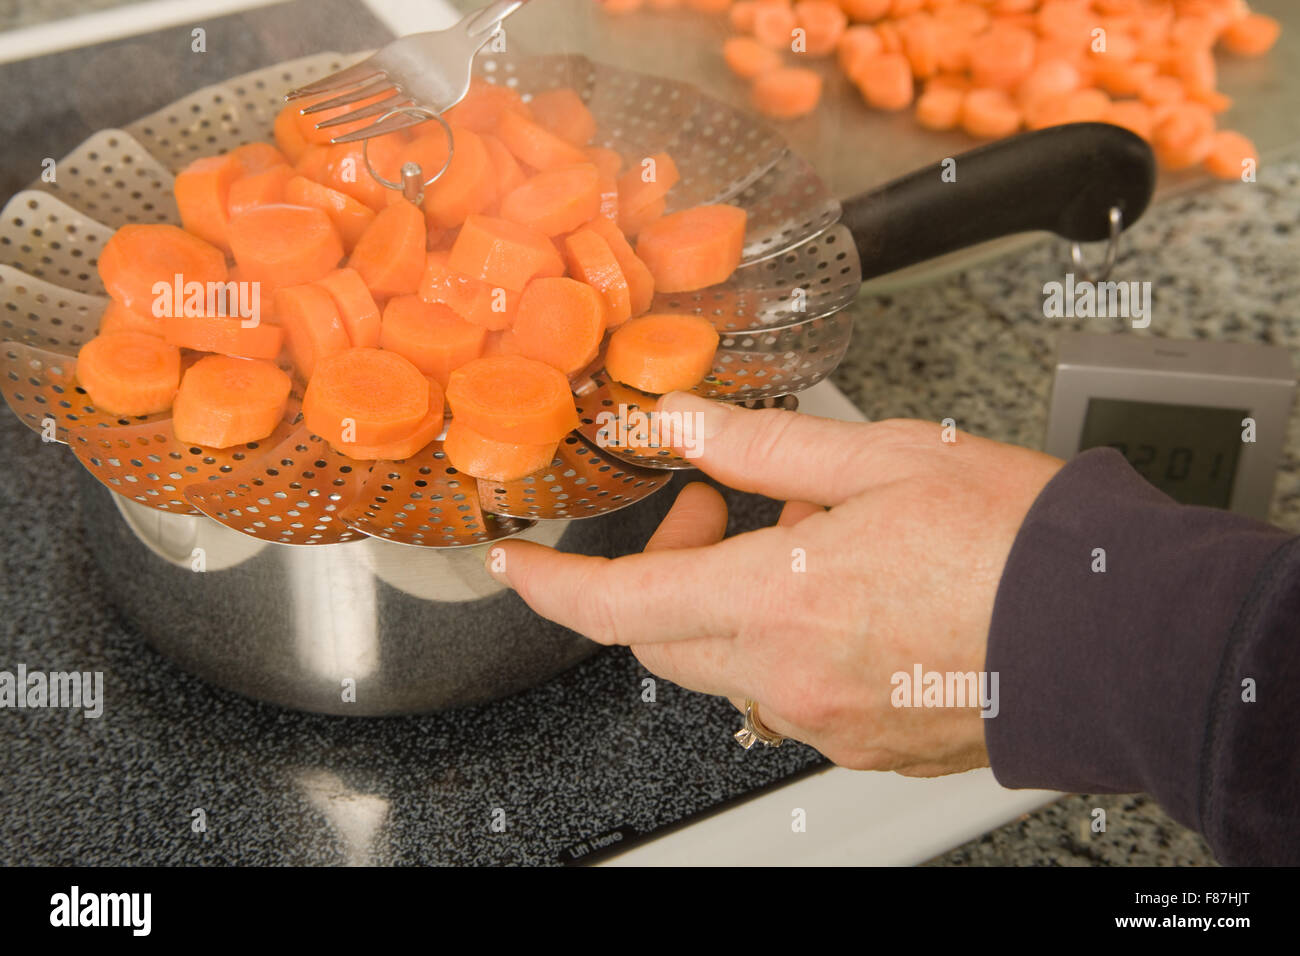 Blanching Vegetables In Big Cooking Pot Preparation Stock Photo